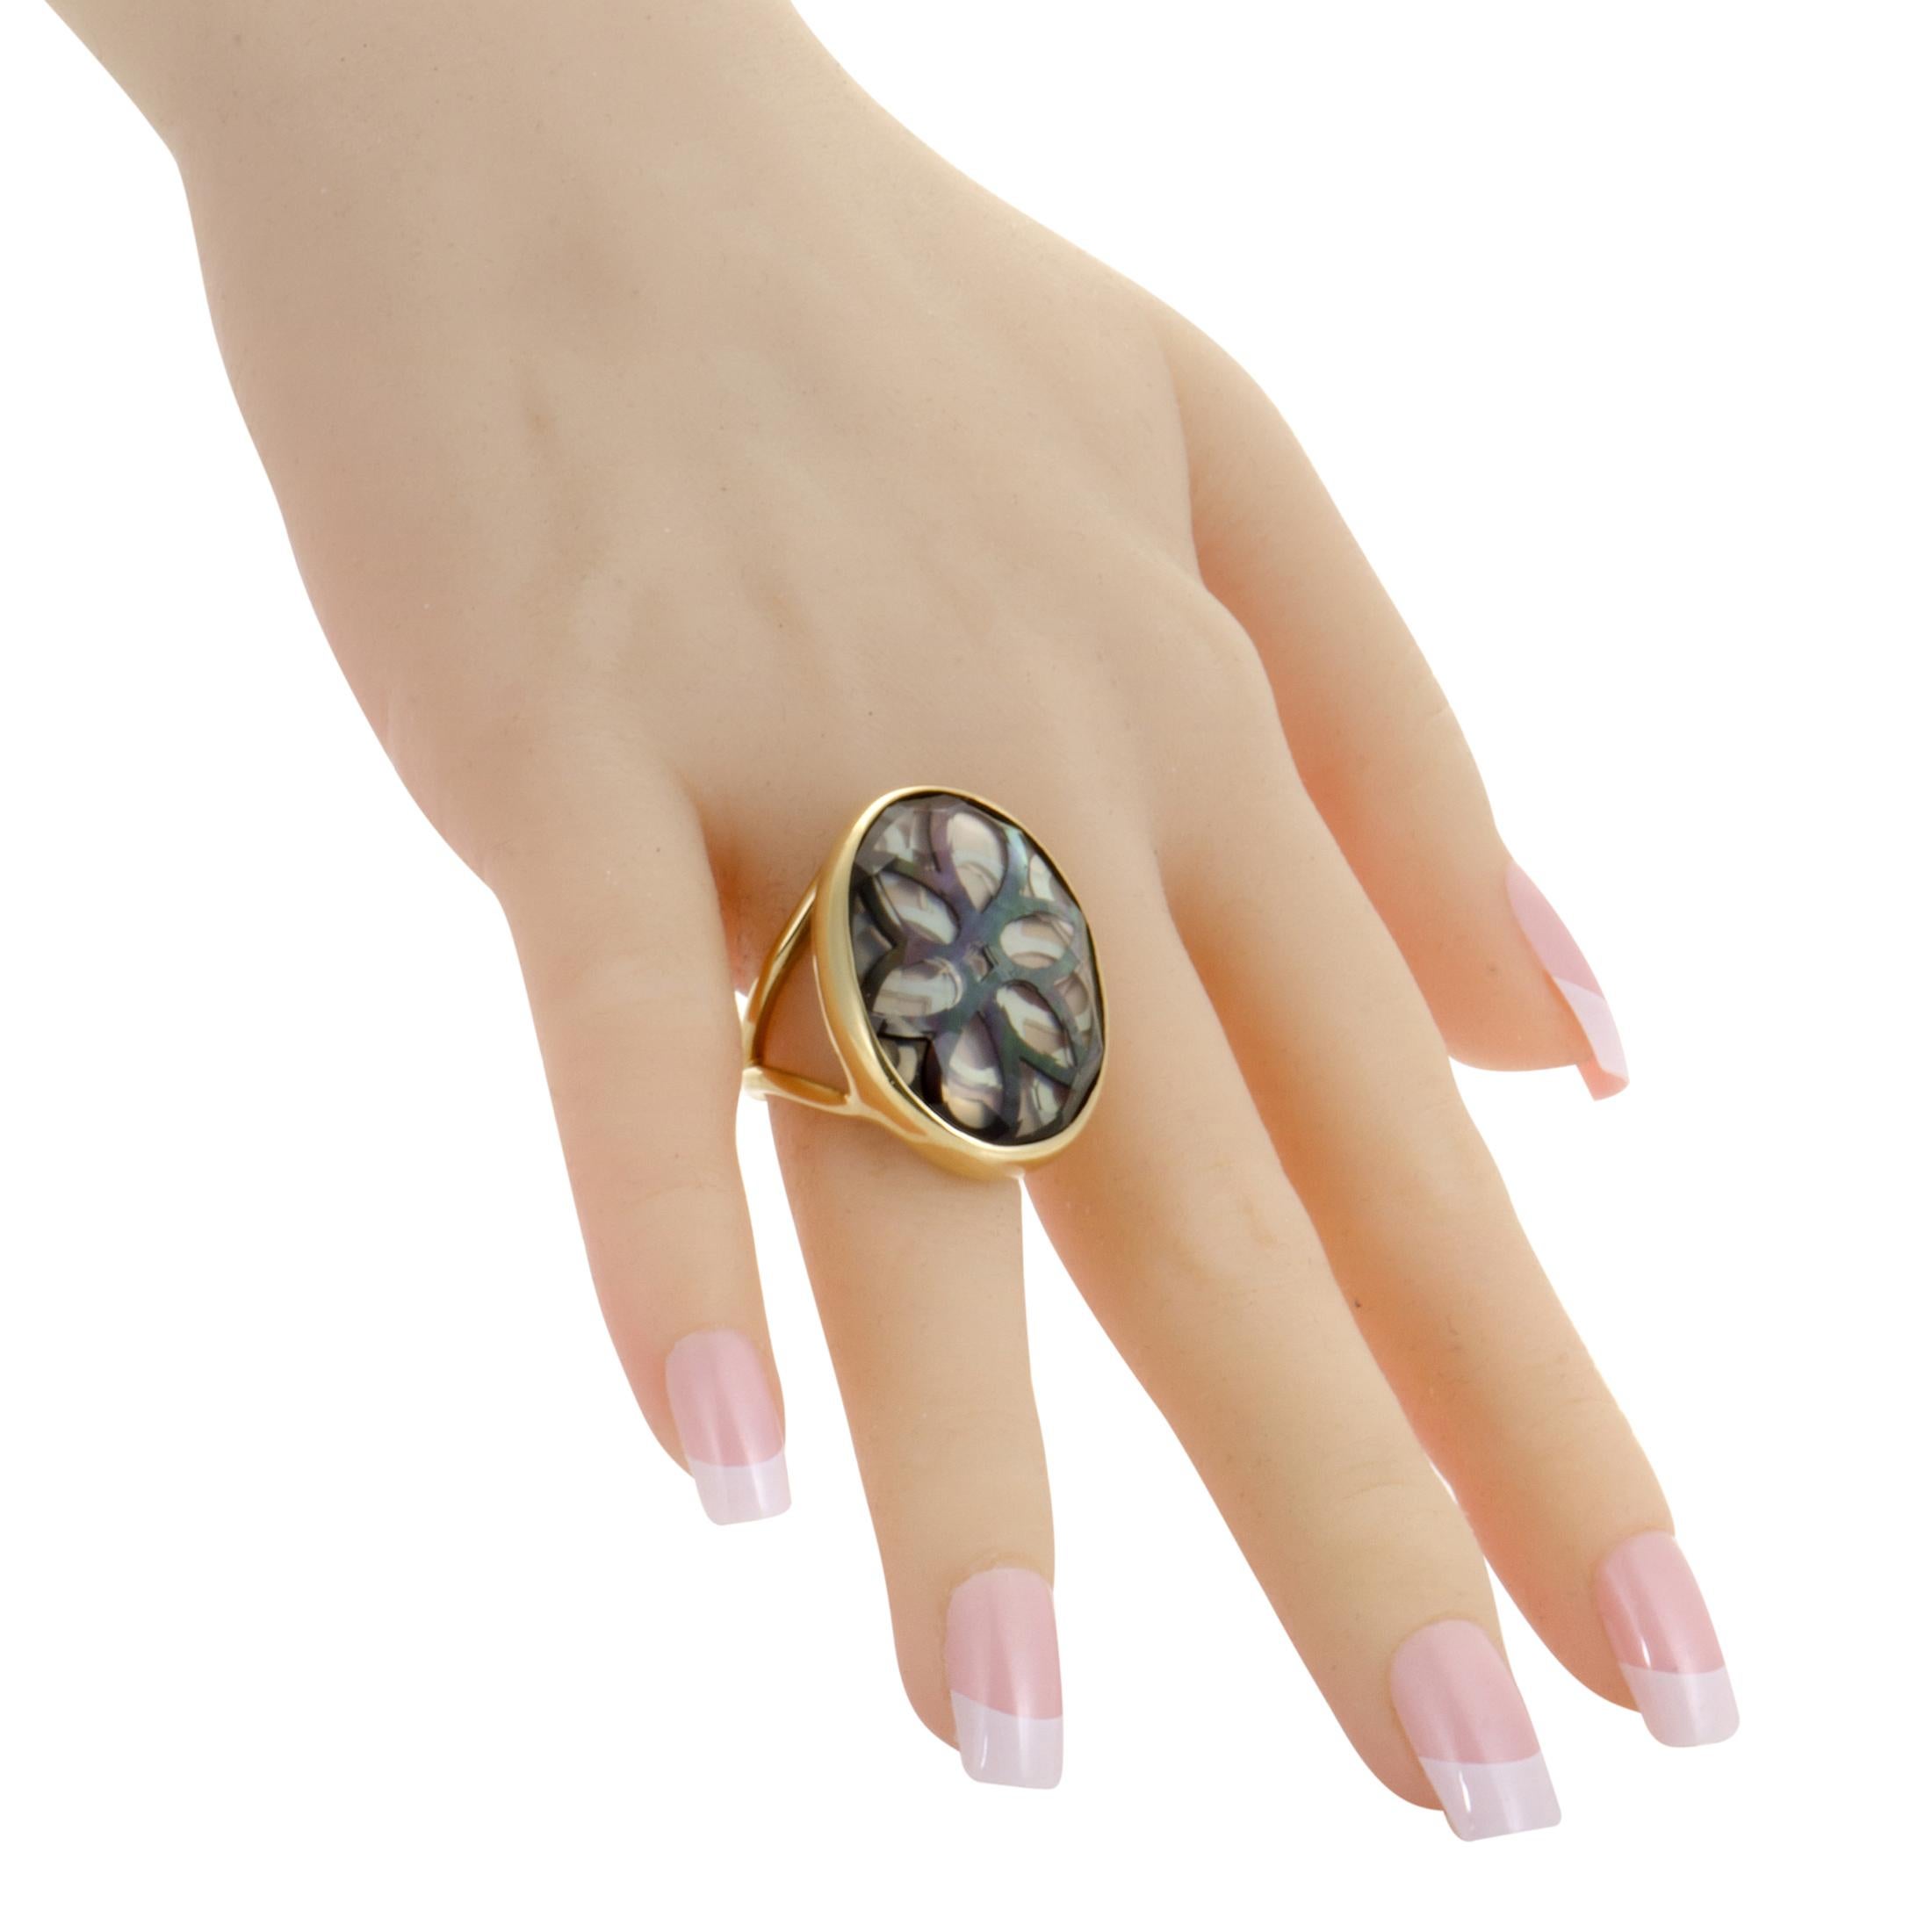 Women's Polished Rock Candy 18 Karat Yellow Gold Quartz and Mother of Pearl Cutout Ring